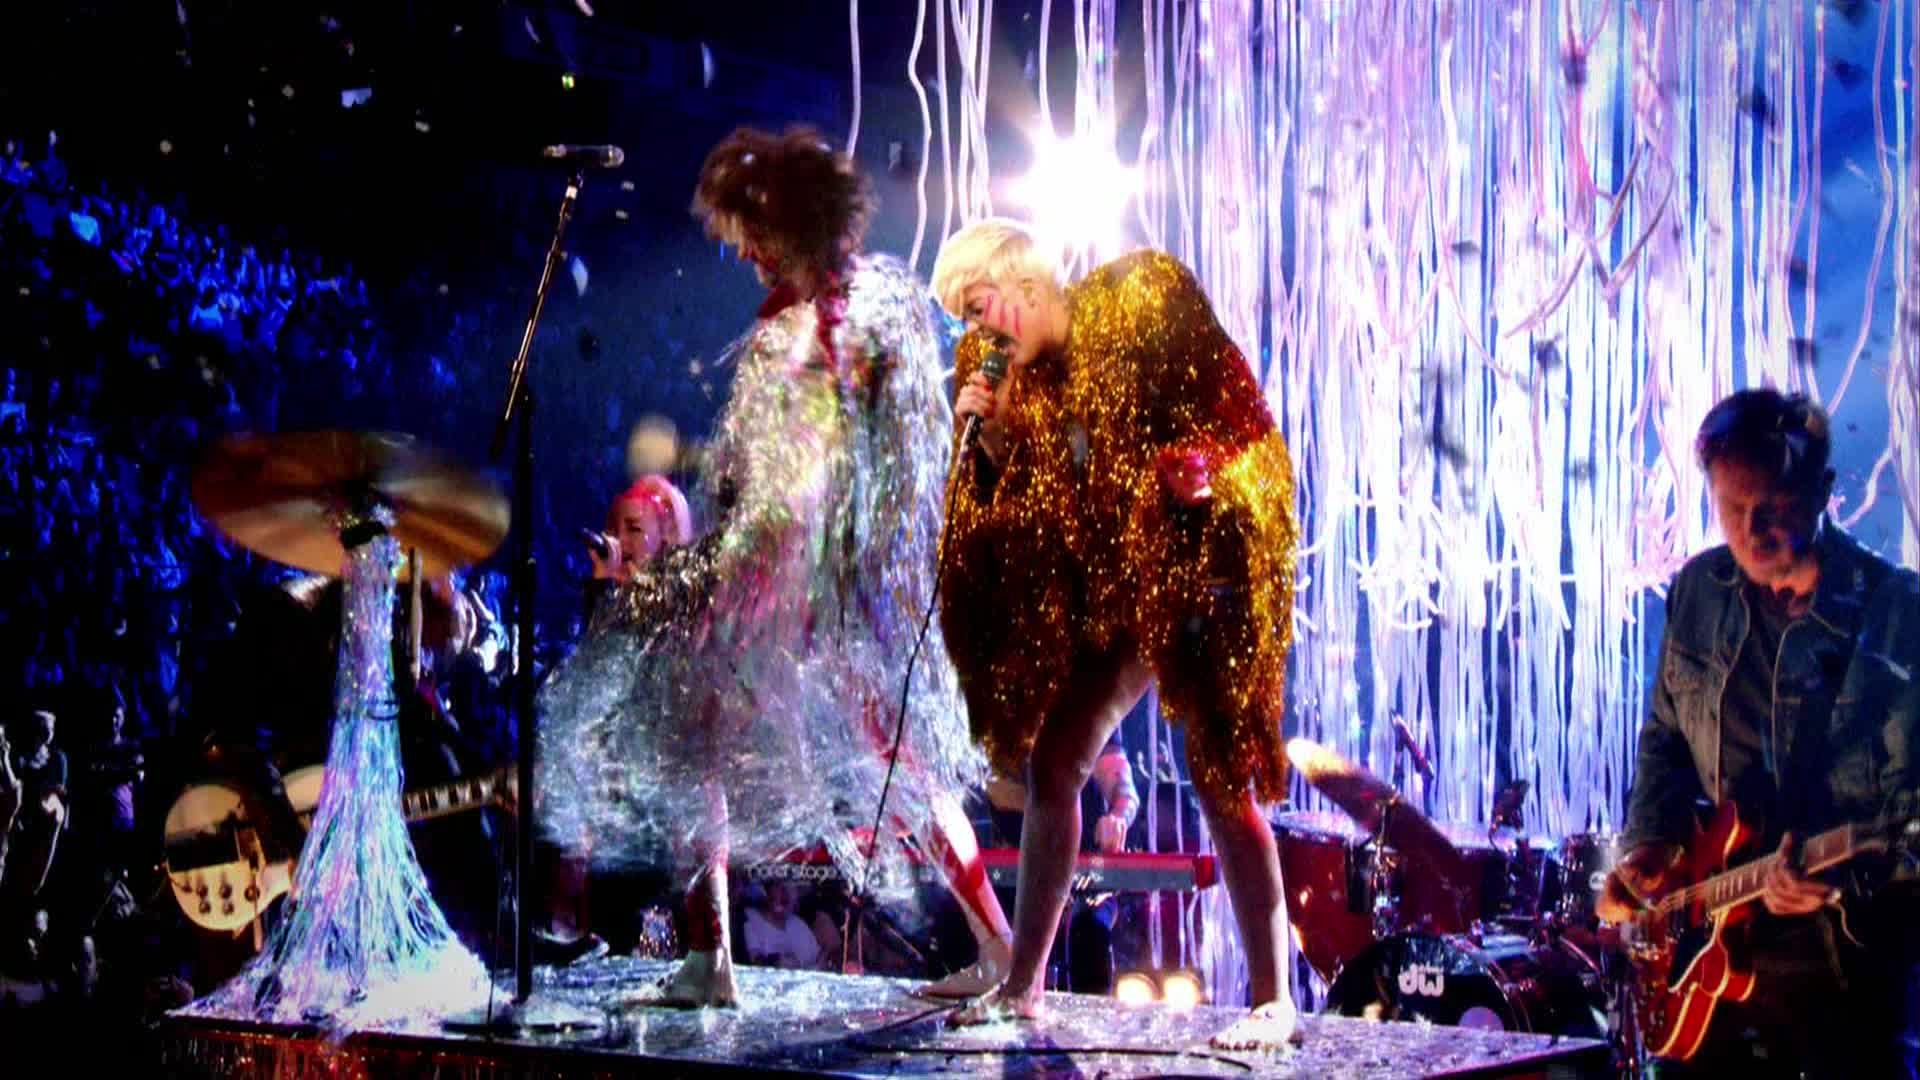 Miley Cyrus [ft The Flaming Lips] - 2014-05-18, Billboard Music Awards - 1080 TS - LSD preview 23